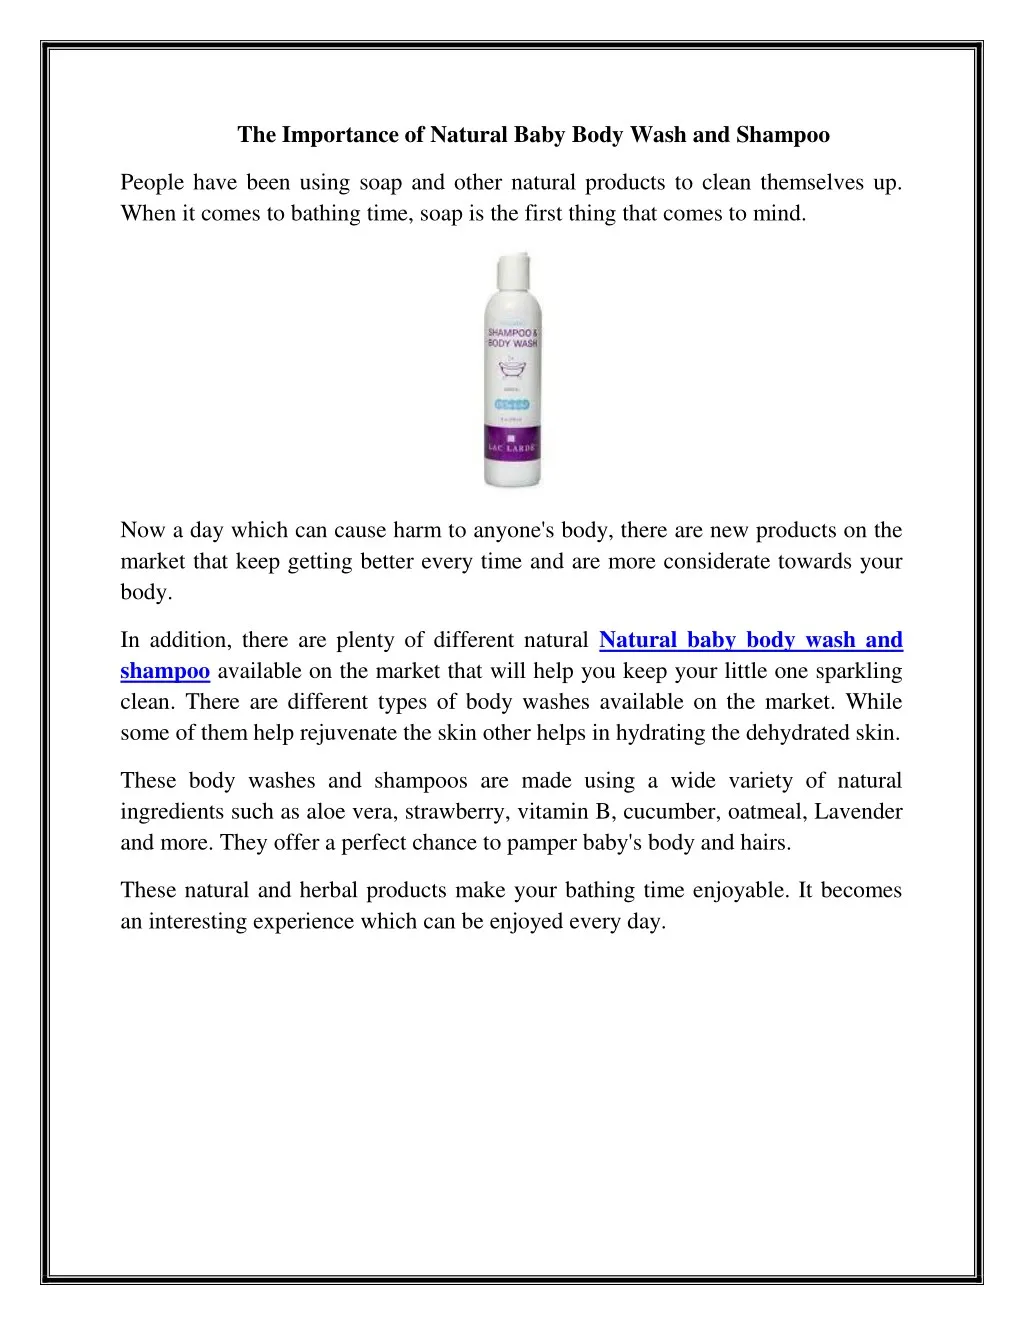 the importance of natural baby body wash